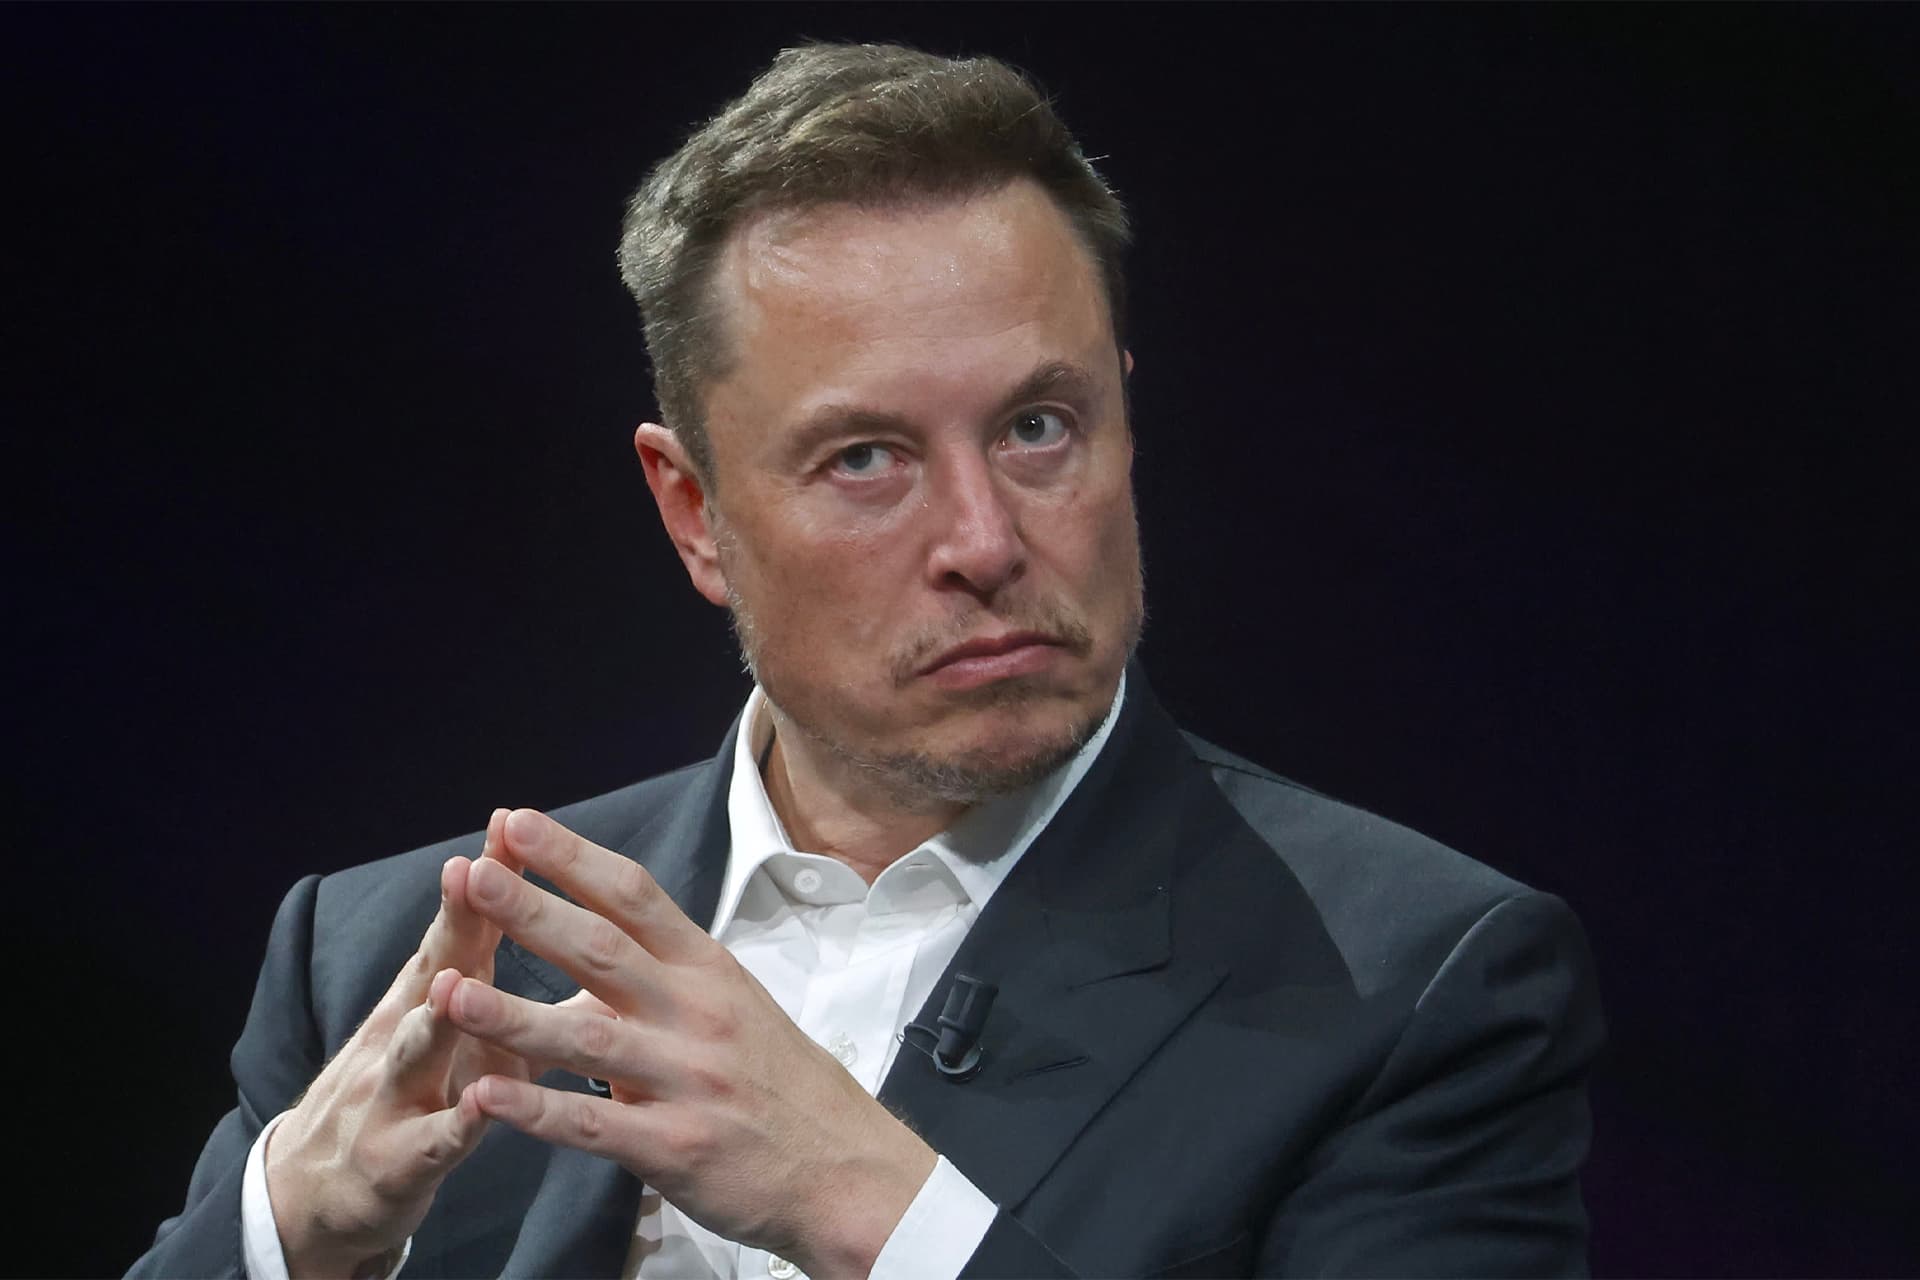 elon musk angry hands suit dark 64a796a60f068bdcb3a57eb9